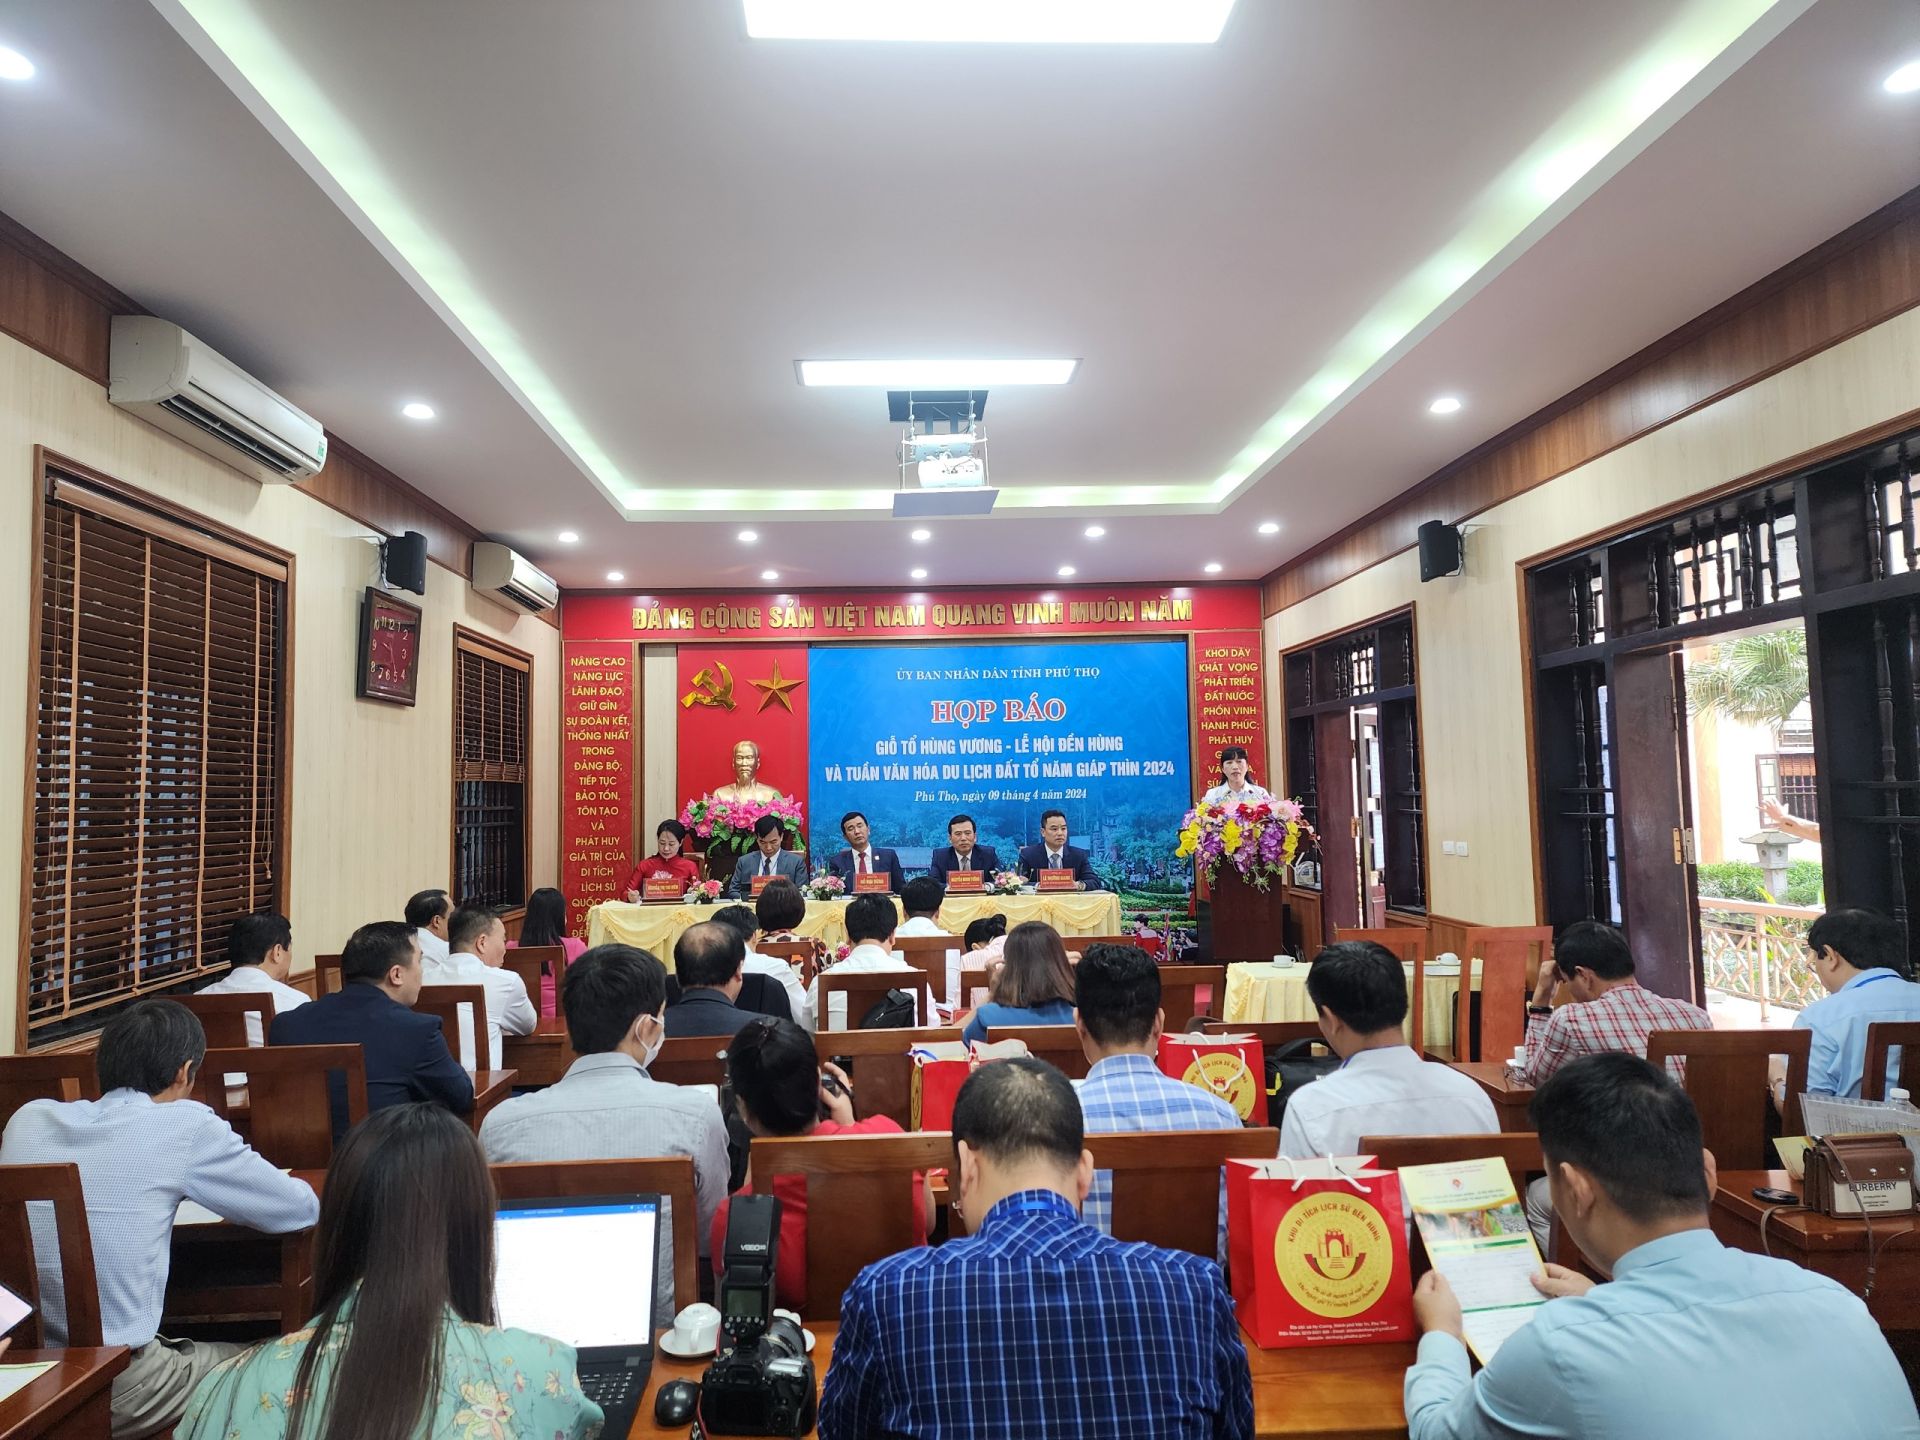 After the opening ceremony, the Organising Committee for the Hung Kings’ Anniversary - Hung Temple Festival held a press conference with reporters from central and local news agencies and newspapers